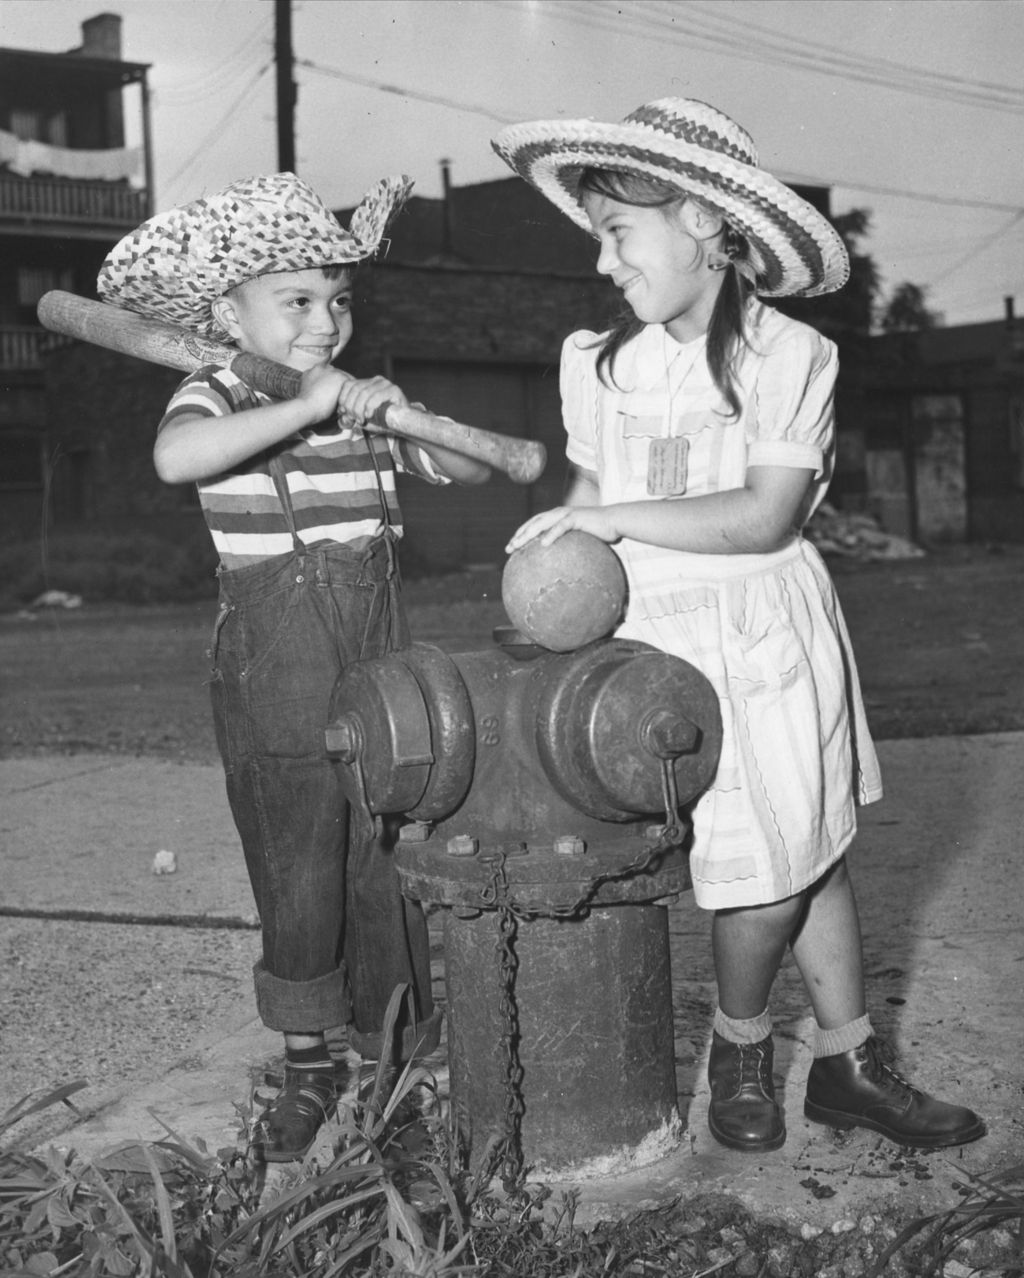 Miniature of Boy and a girl standing next to a fire hydrant with a bat and softball